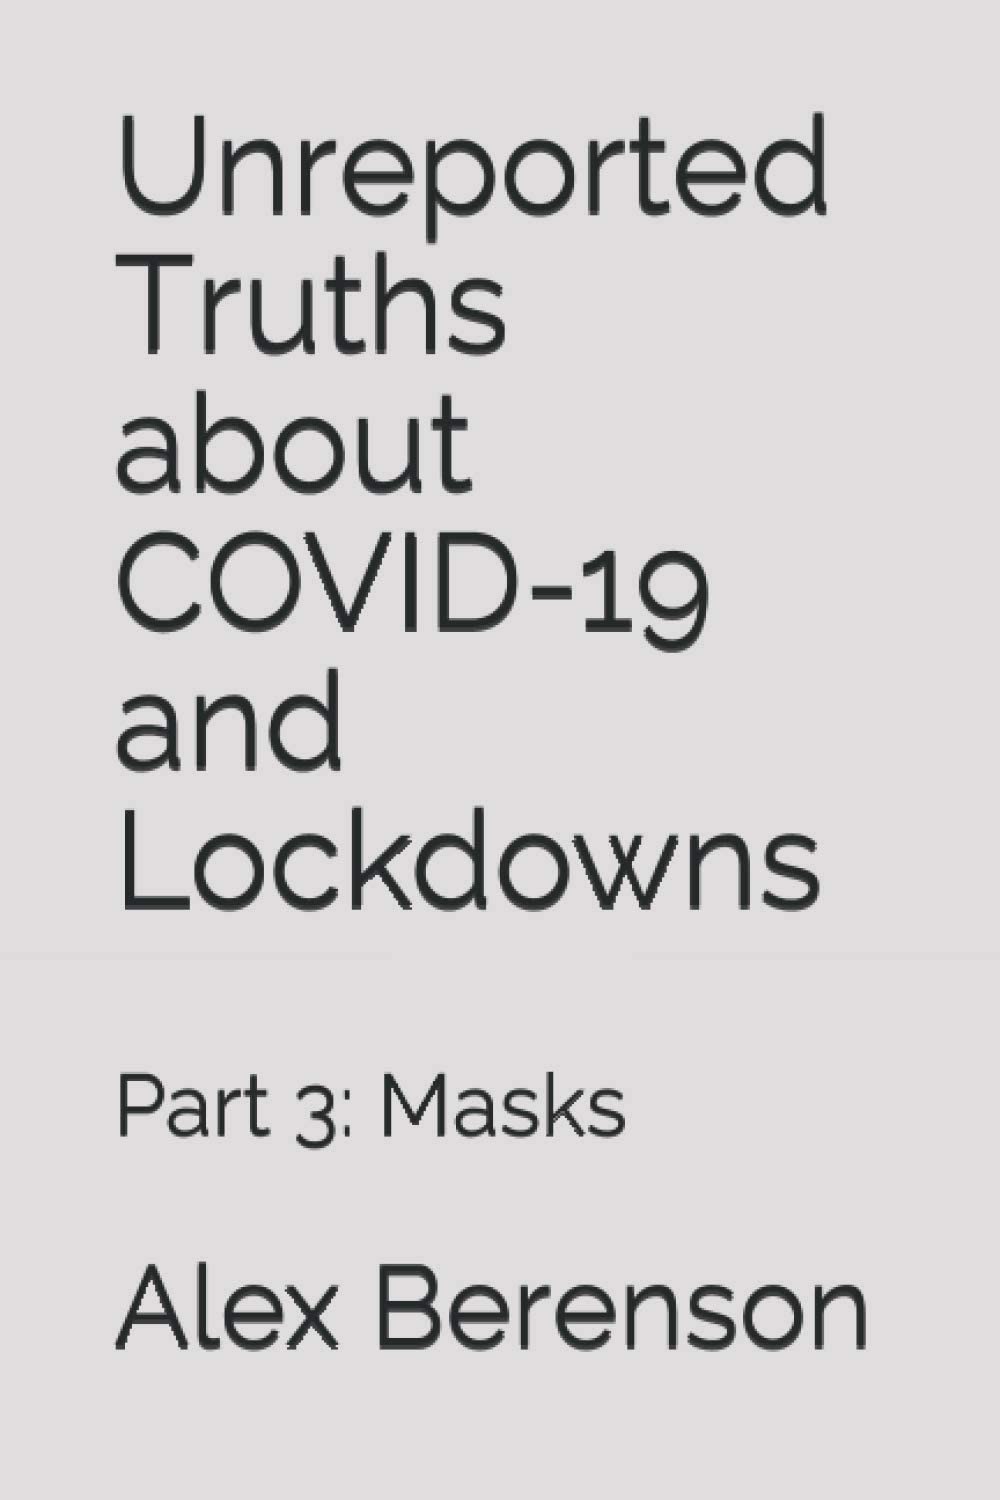 Unreported Truths About Covid-19 and Lockdowns: Part 3: Masks